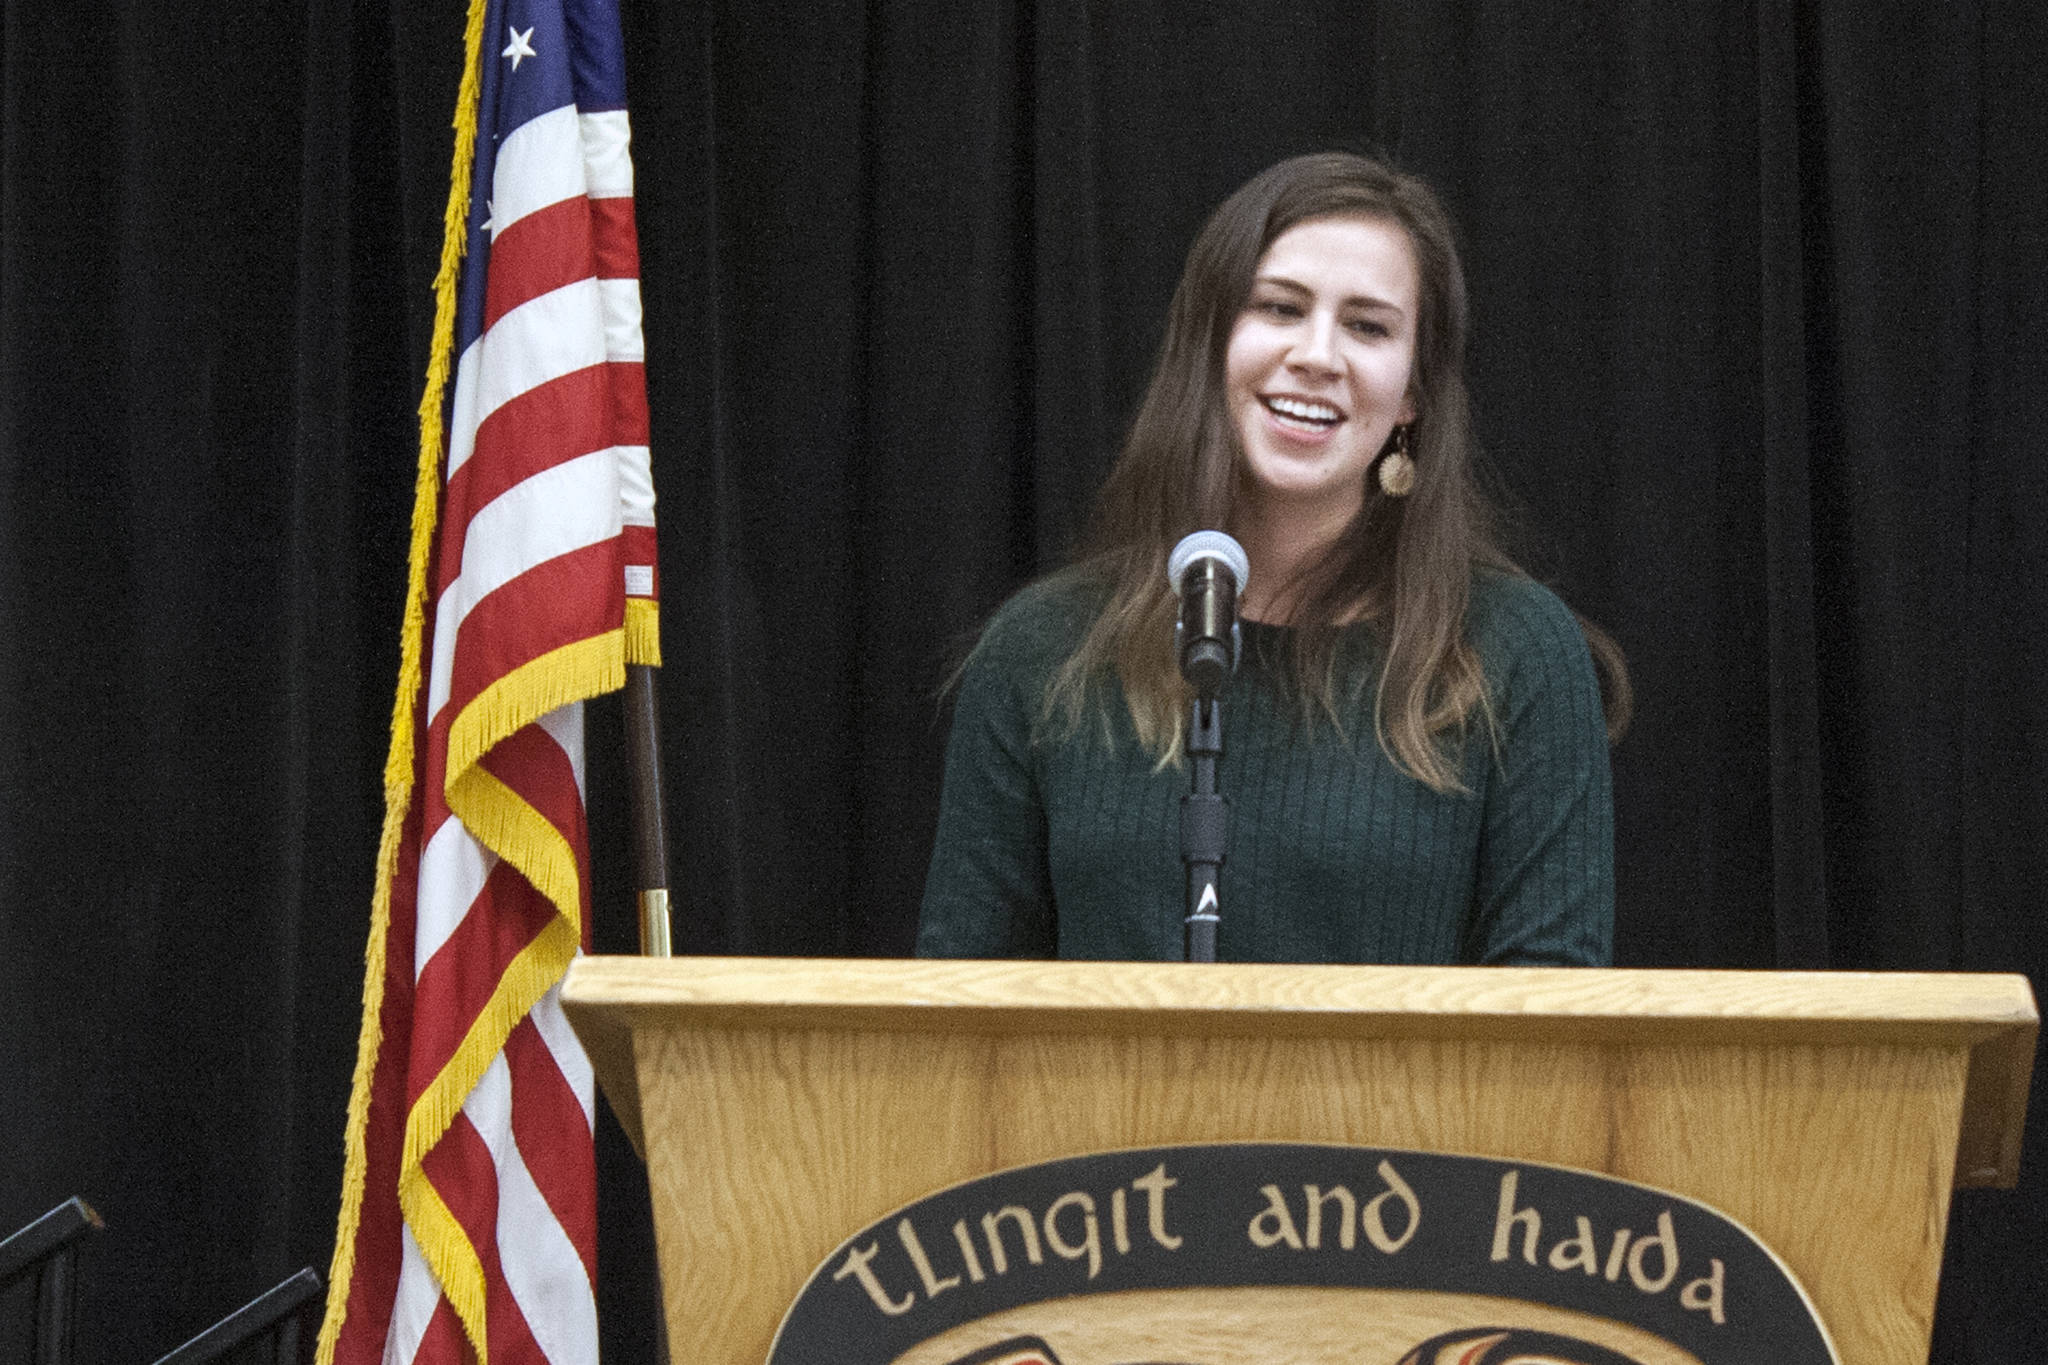 Village Coffee Company owner Justyne Wheeler of Yakutat gives a speech following the announcement that her business was one of the 2019 Path to Prosperity winners. The distinction comes with a $25,000 prize. (Ben Hohenstatt | Juneau Empire)